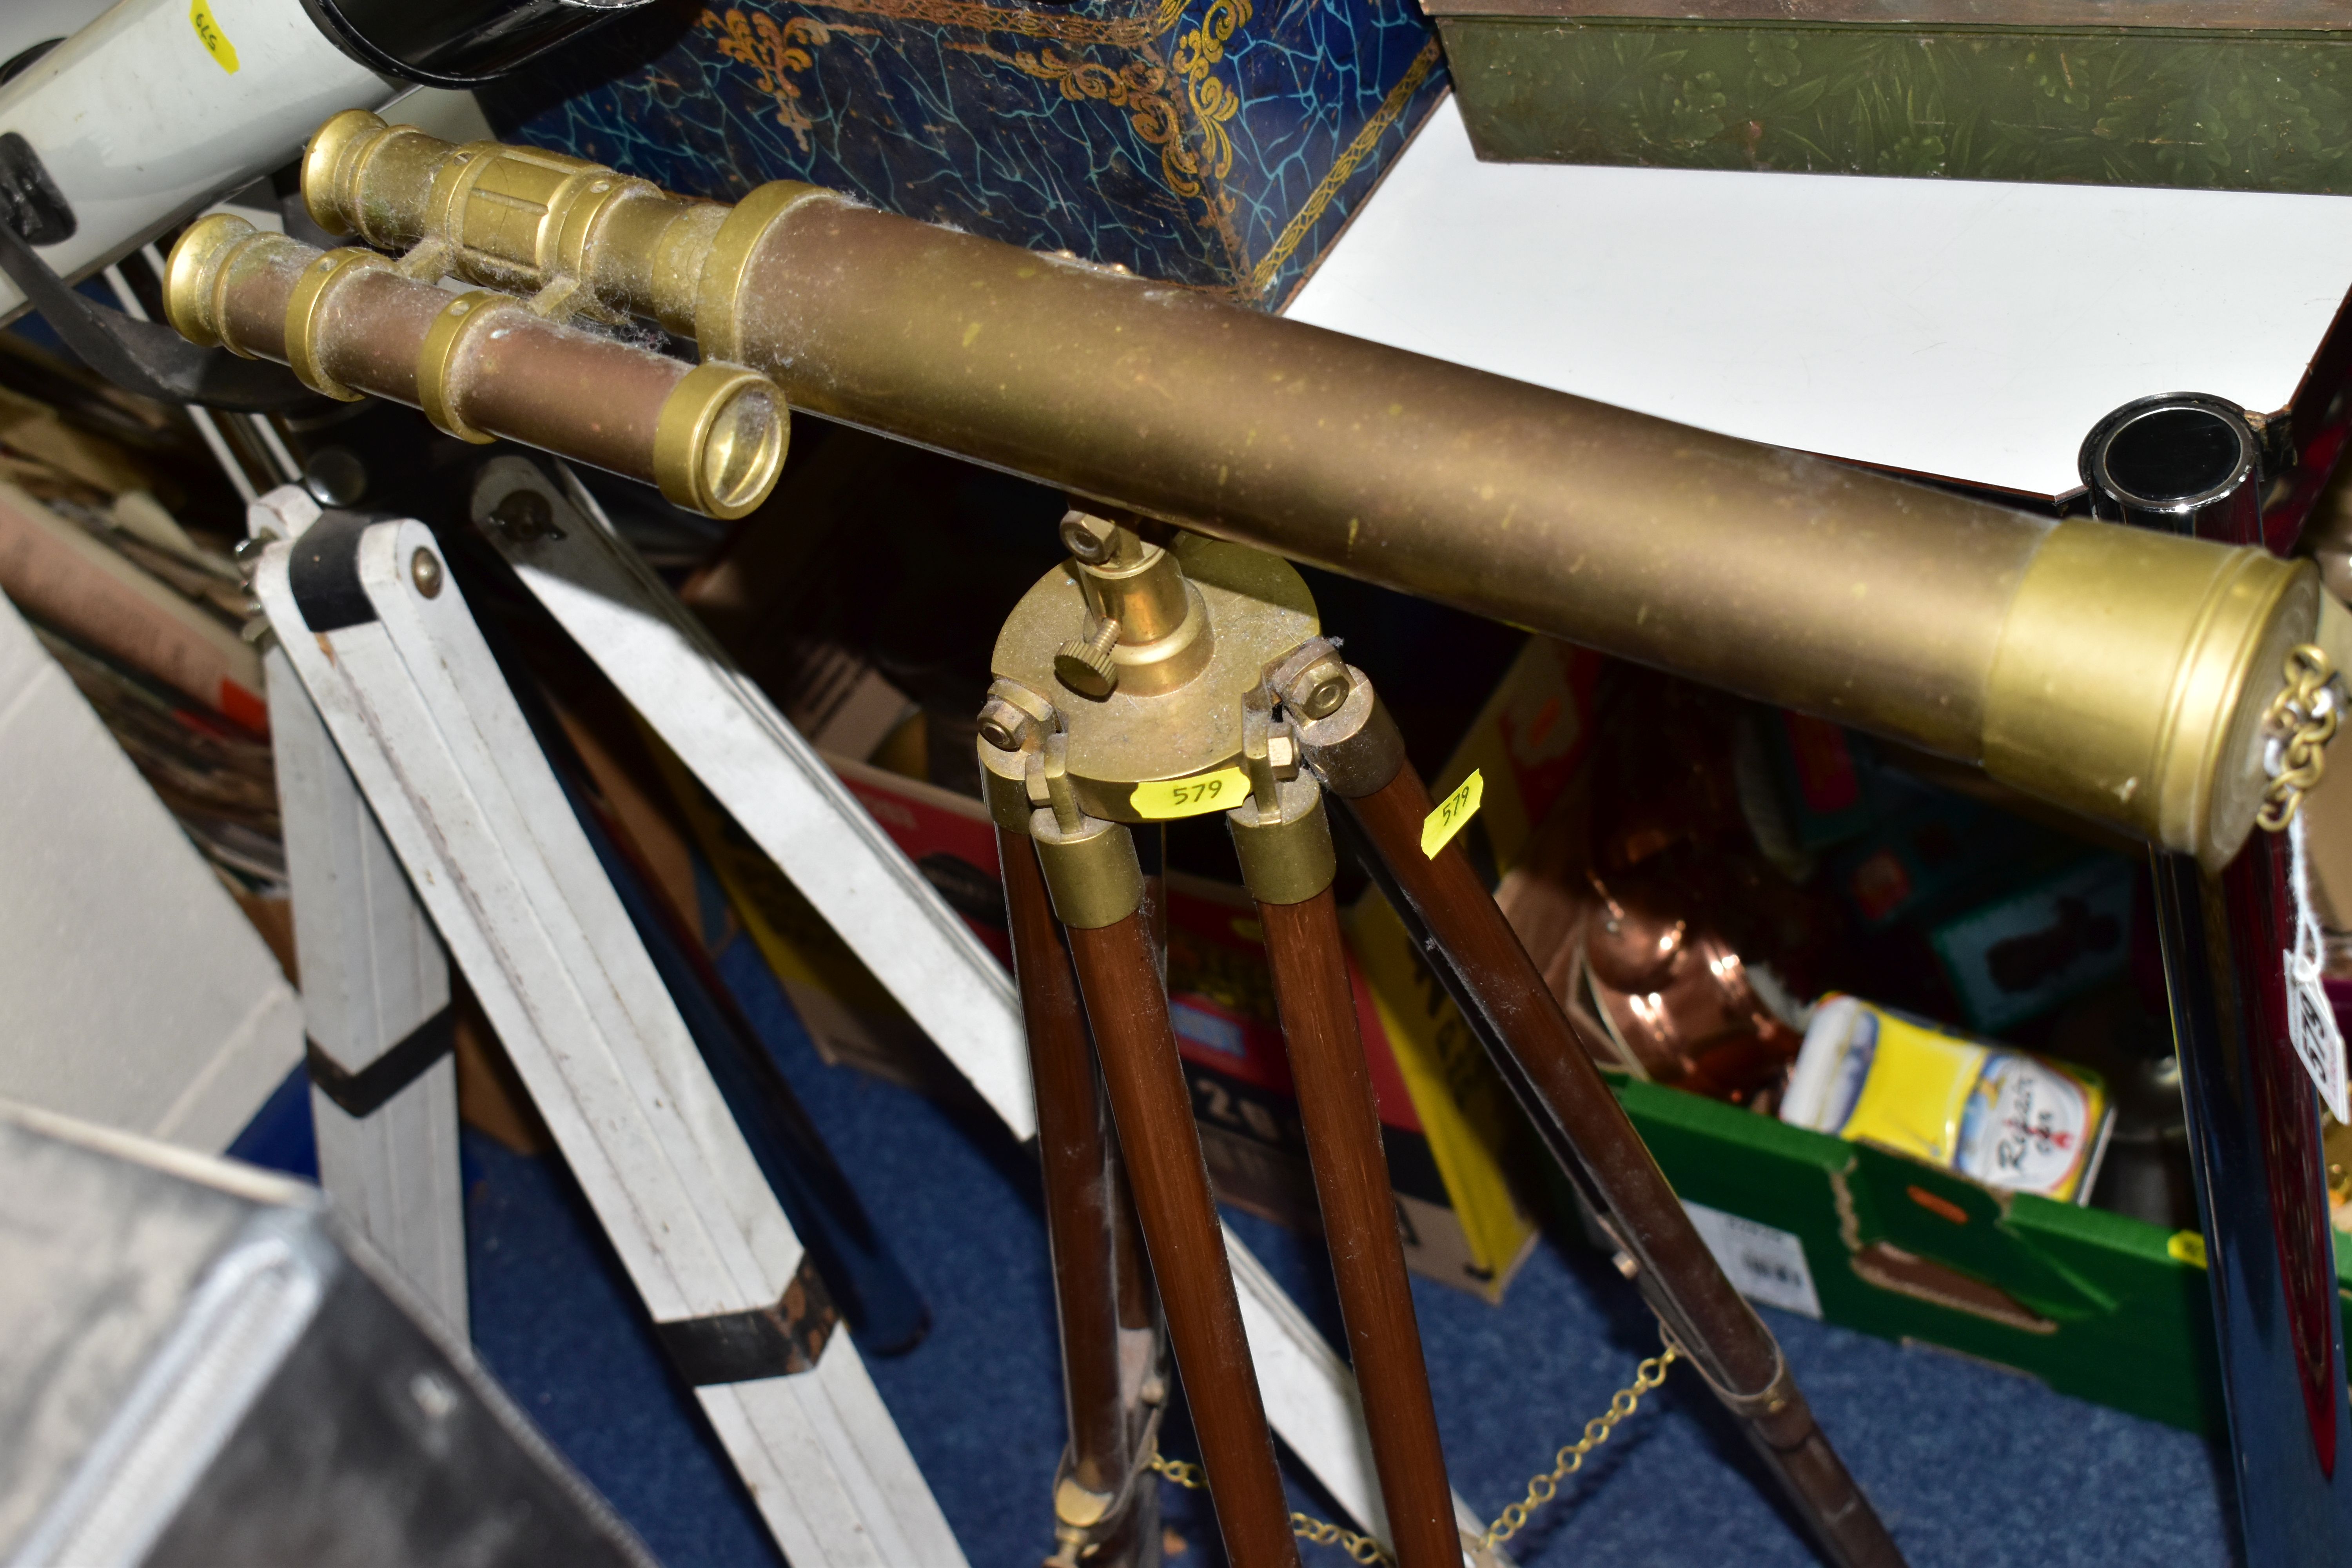 TWO VINTAGE TELESCOPES, both on wooden stands, one is brass with brass fittings (dusty, chipped